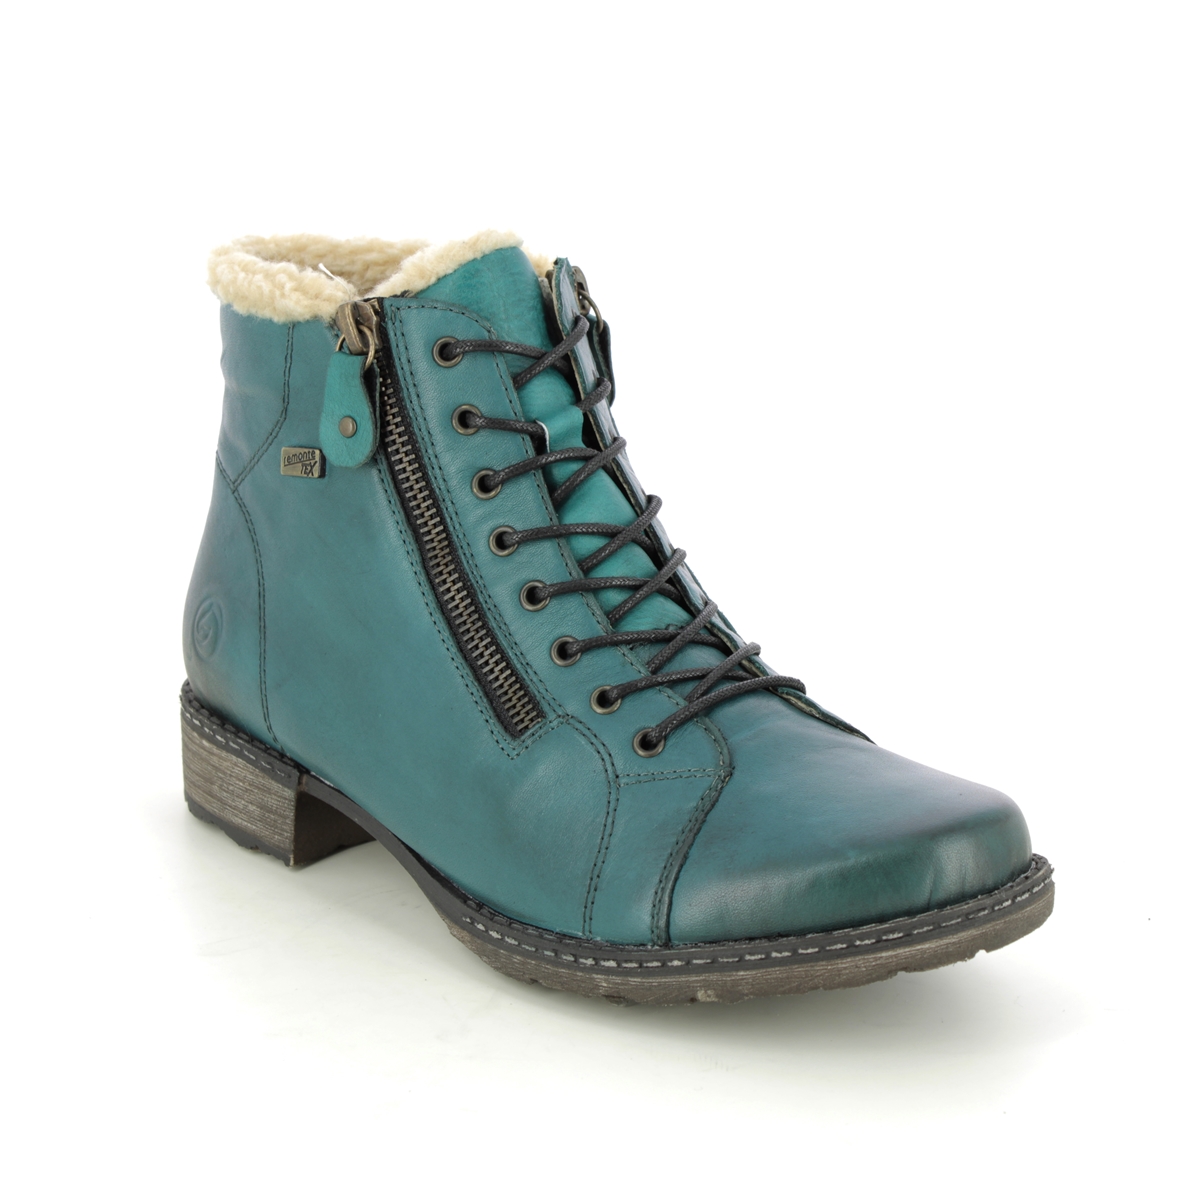 Remonte Peesienna Tex Turquoise Leather Womens Lace Up Boots D4372-12 In Size 41 In Plain Turquoise Leather